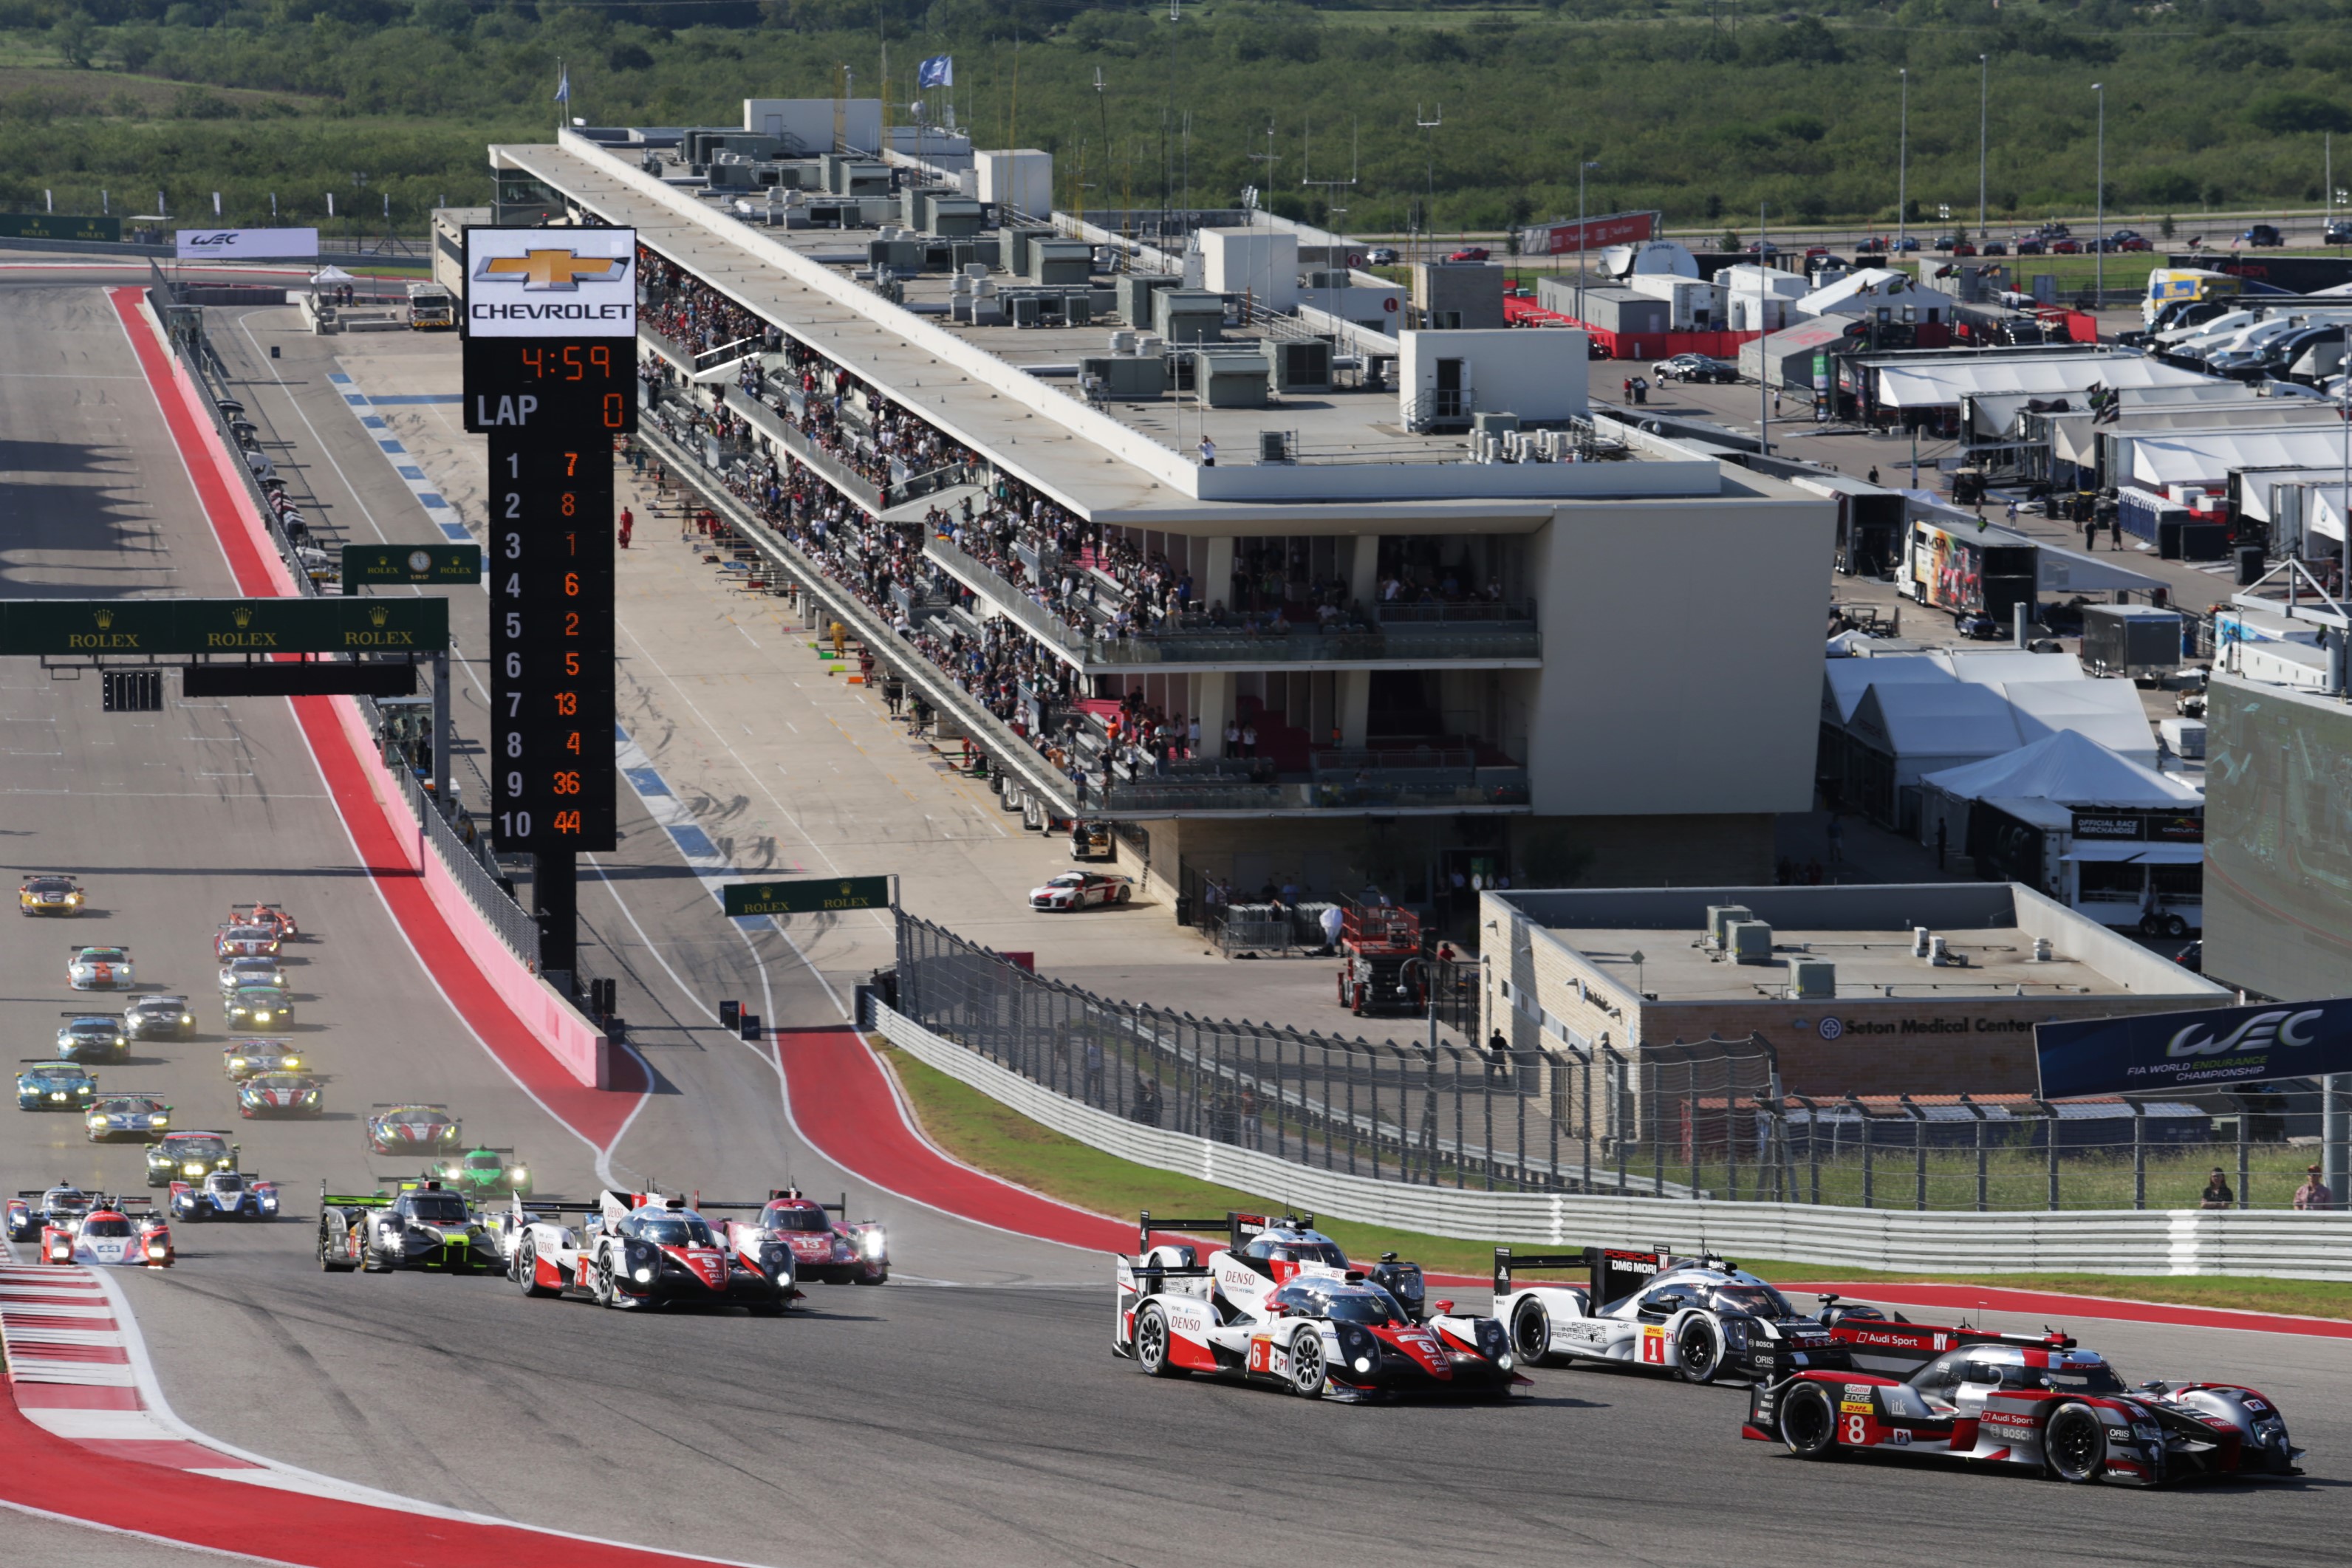 Interlagos and COTA on WEC 2024 schedule, Formula E clash likely - The Race